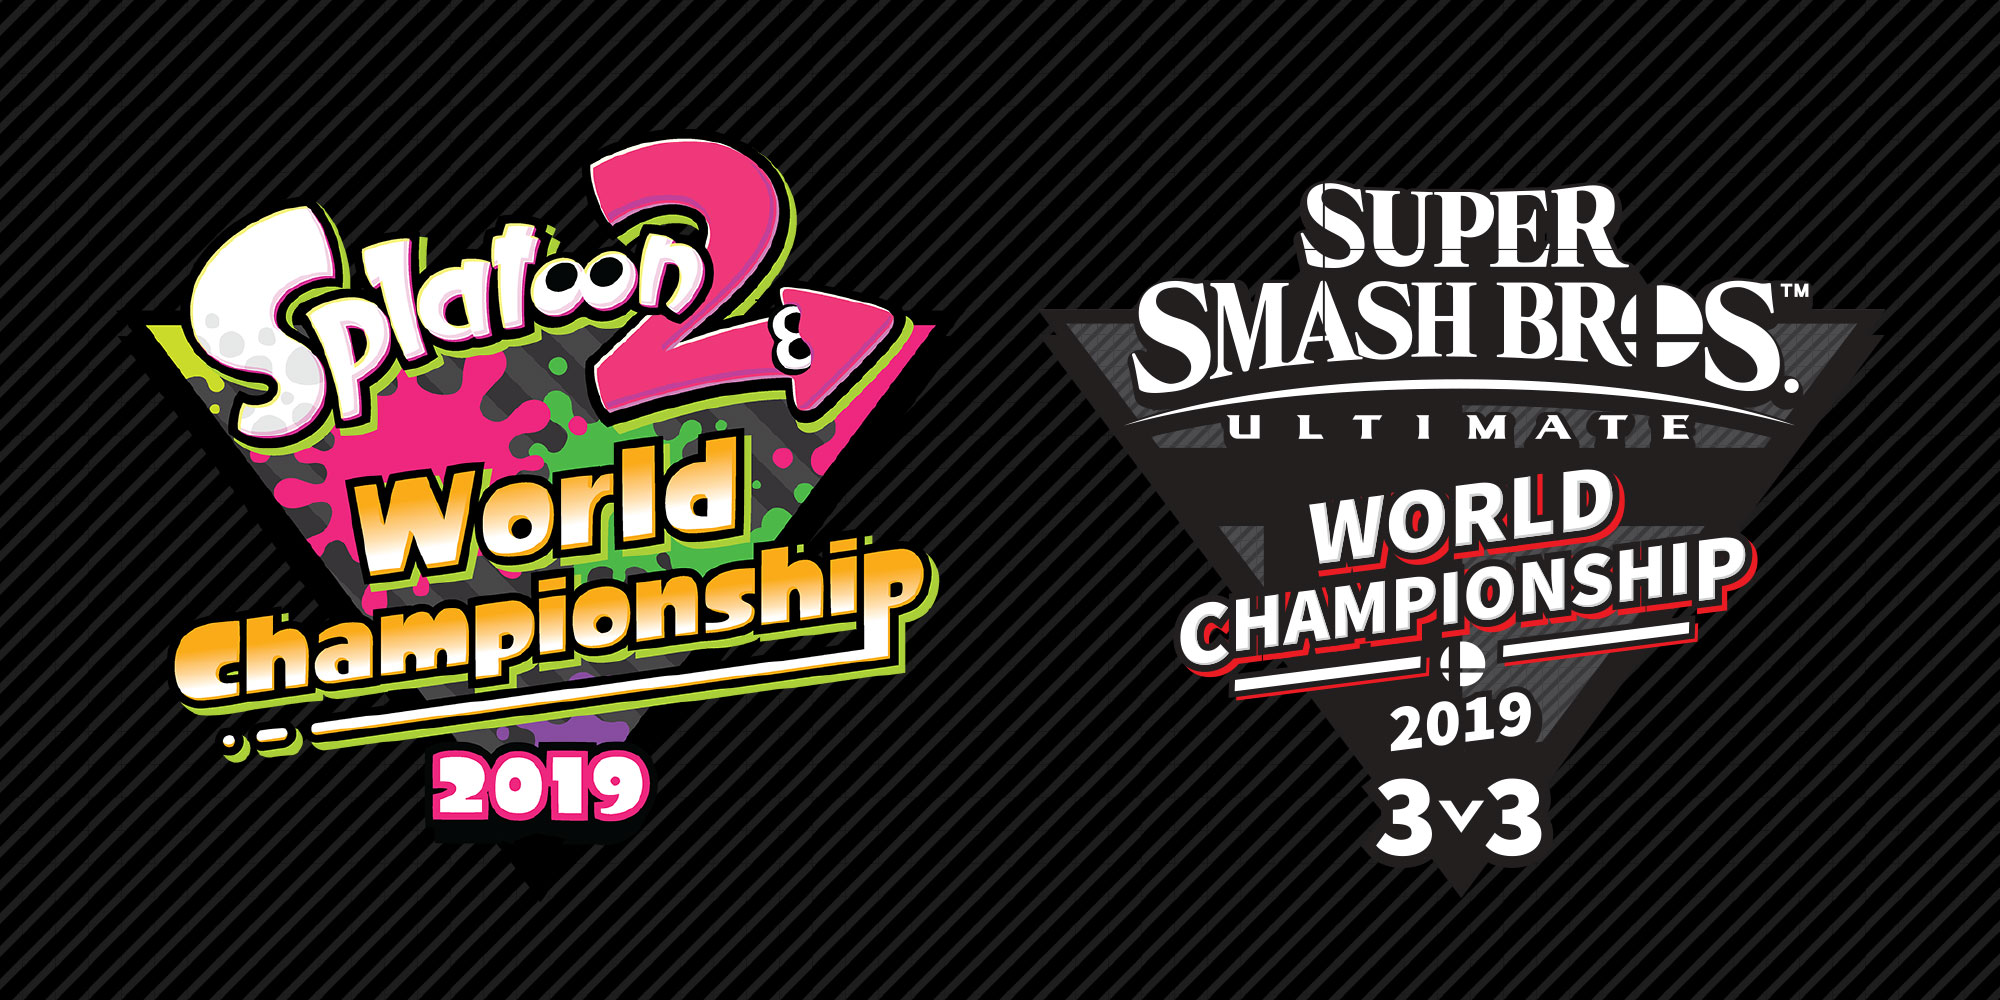 World champions crowned in Splatoon 2 and Super Smash Bros. Ultimate tournaments at E3 2019!